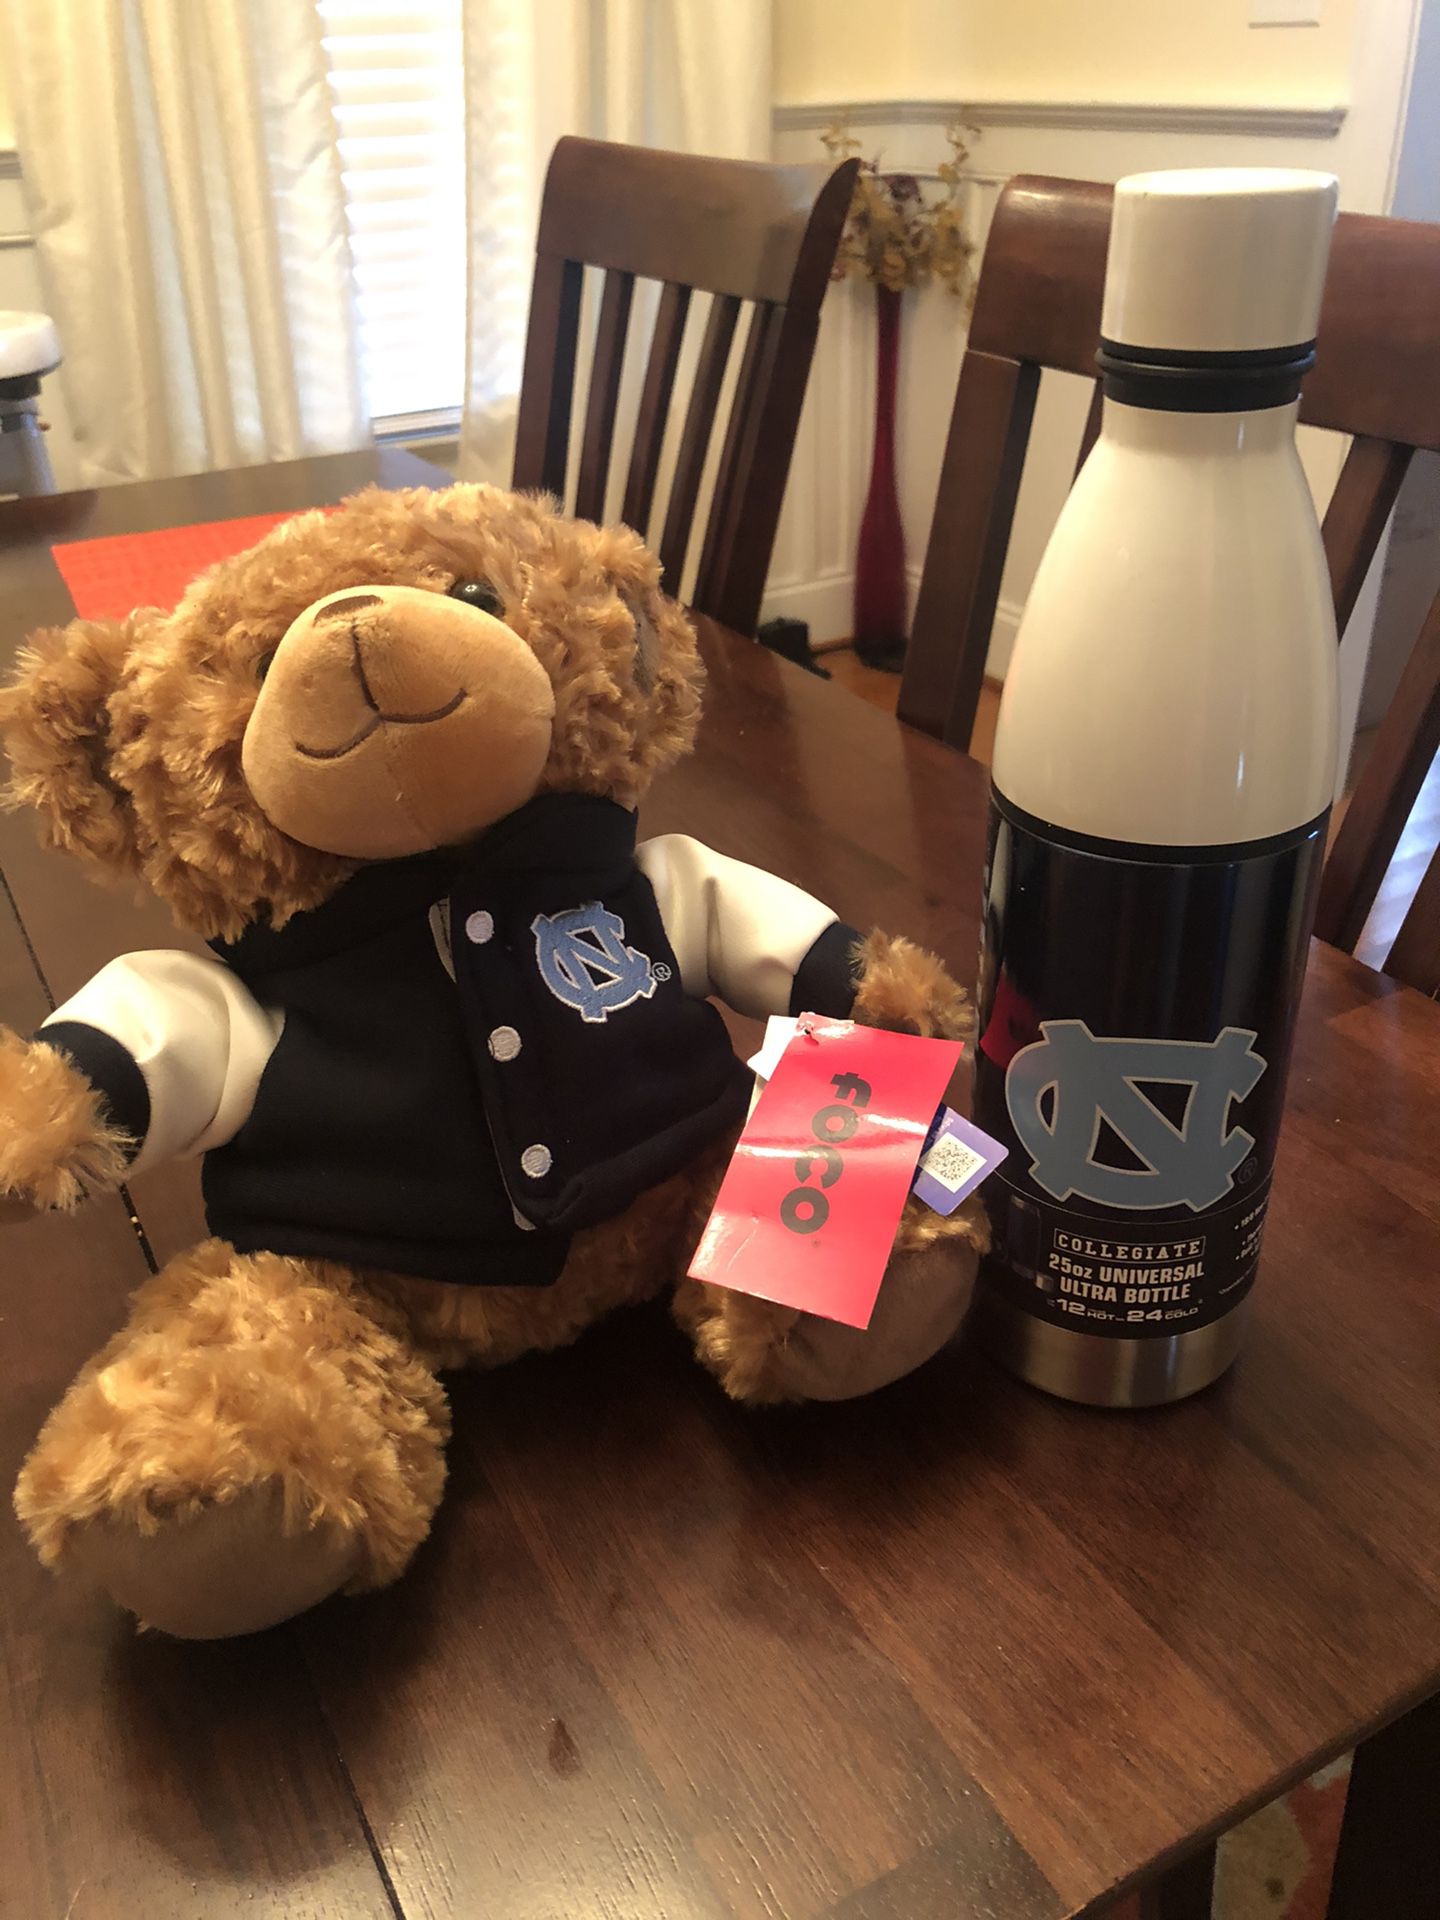 UNC Tarheels stainless steel water bottle and plush bear - NEW